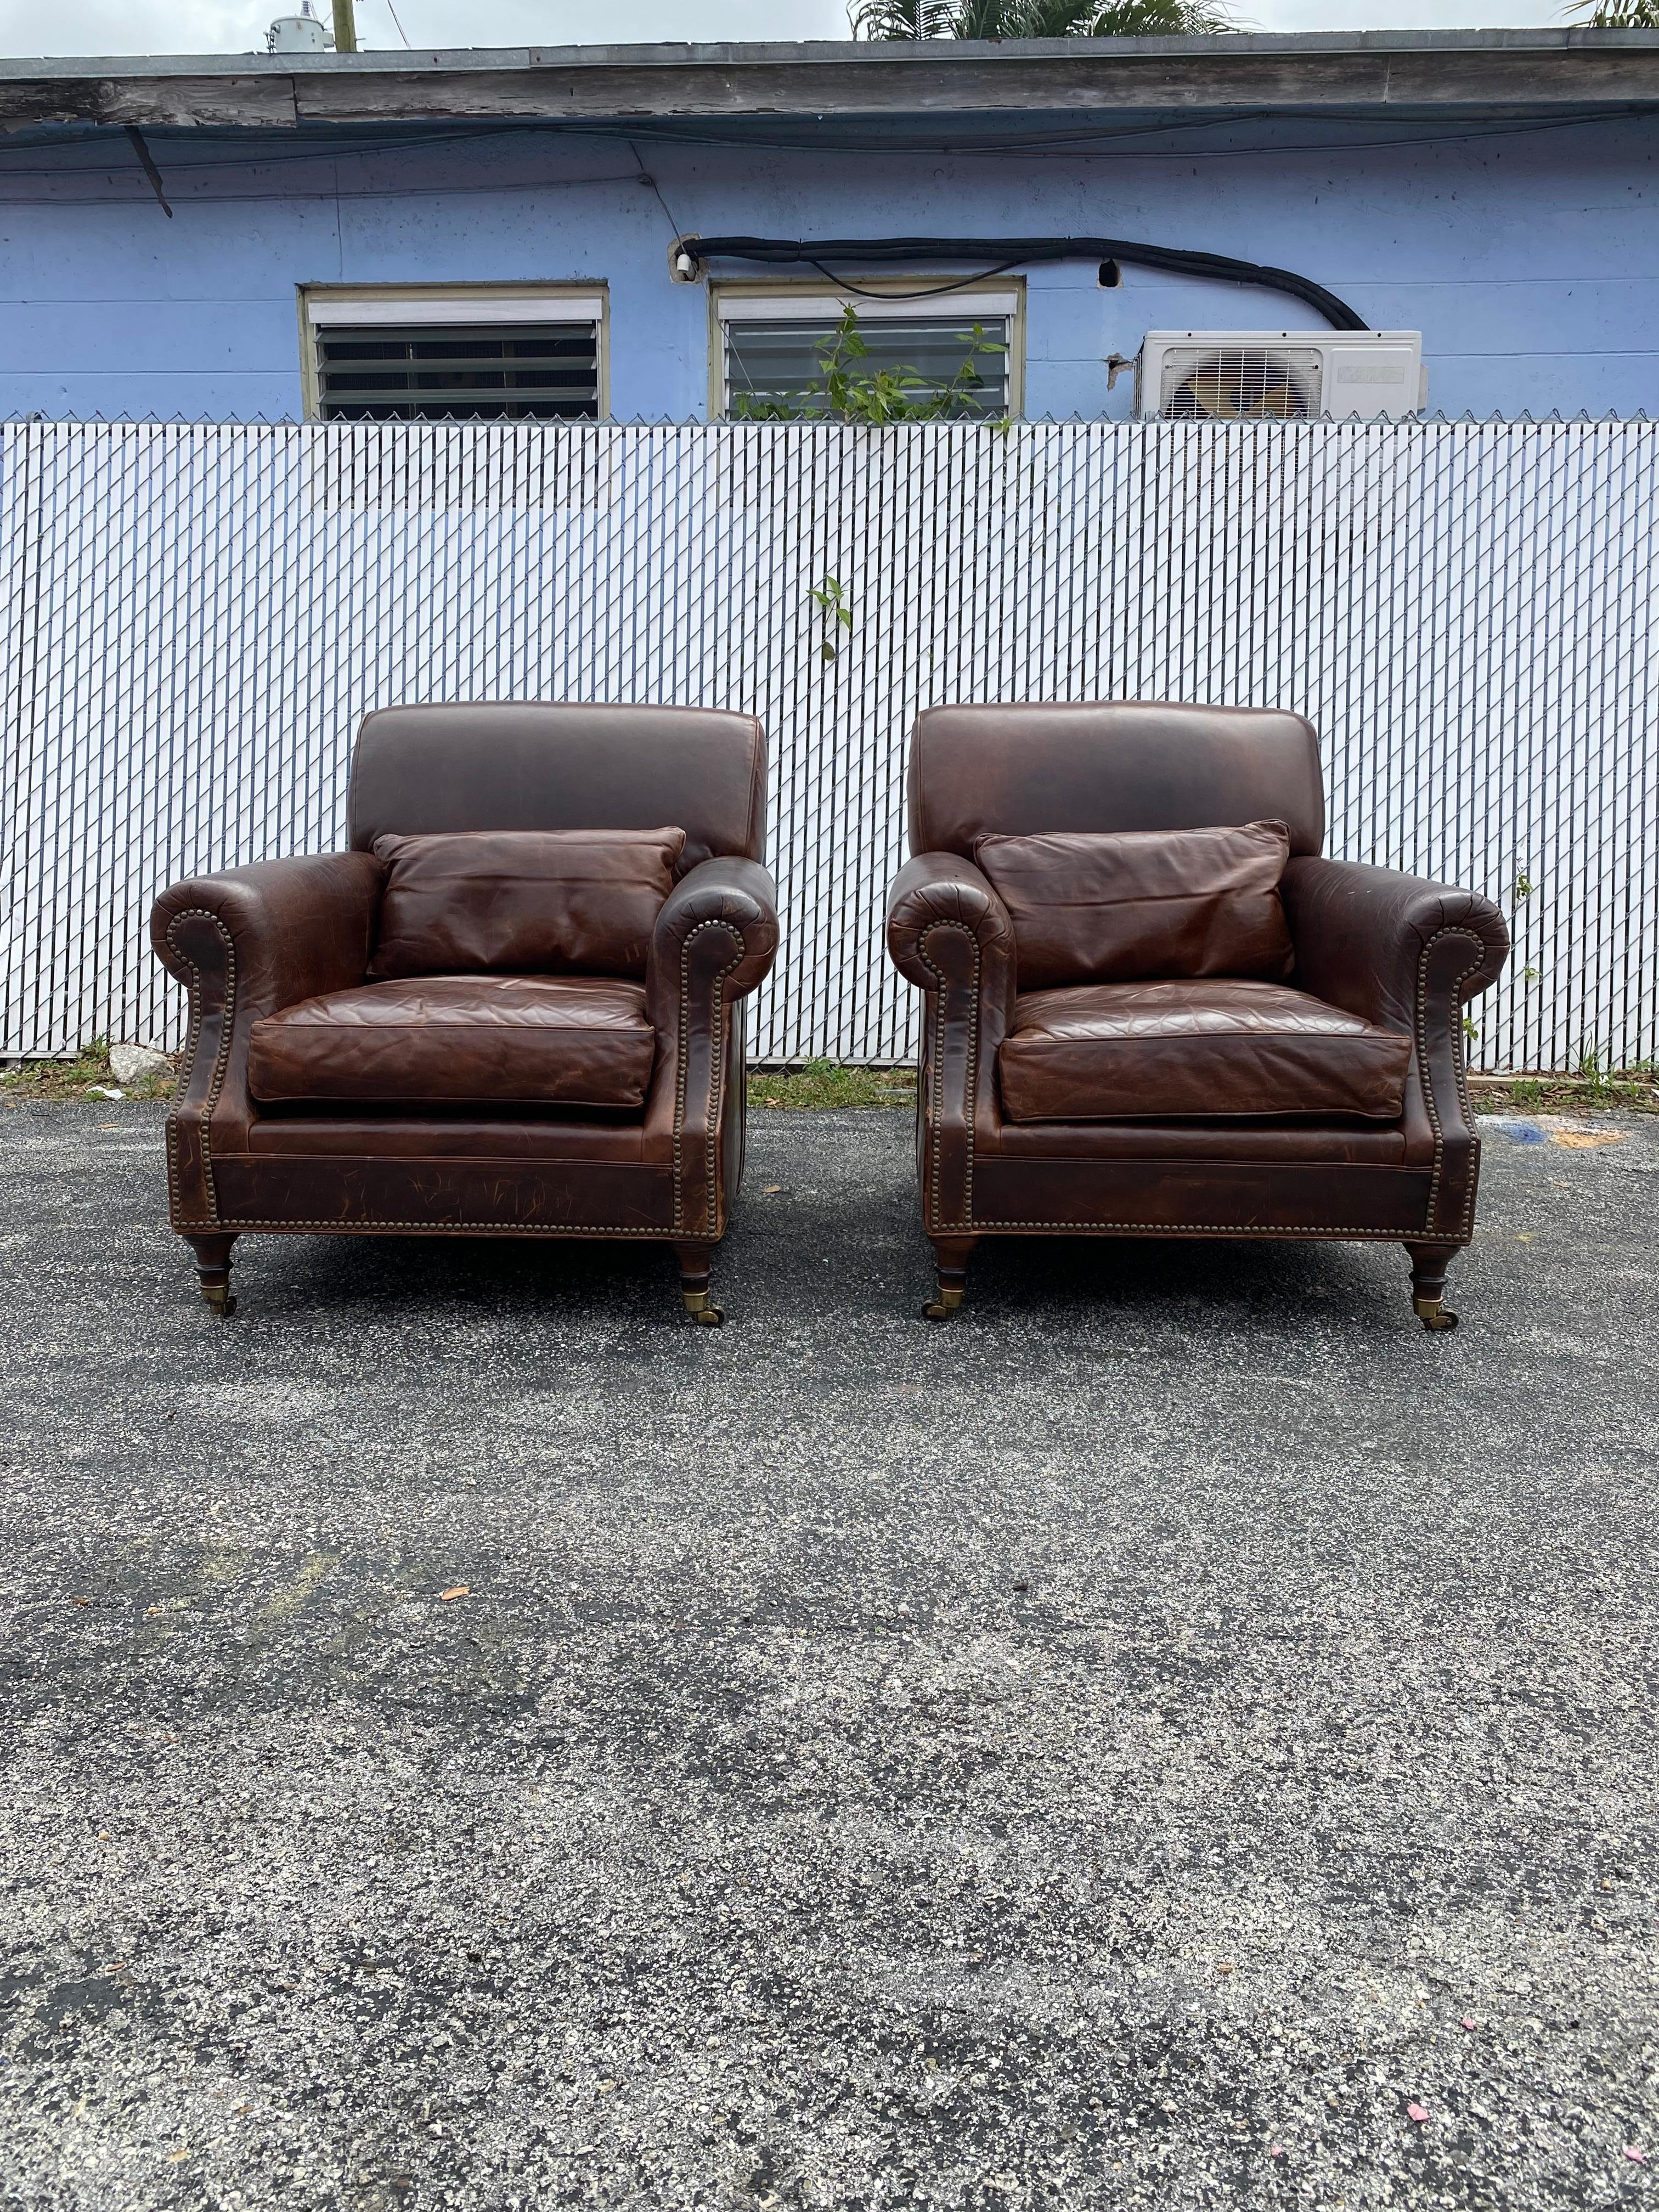 On offer on this occasion is one of the most stunning and rare, Mitchell Gold and Bob Williams, vintage leather club chairs on castors set you could hope to find. In the style of George Smith. Outstanding design is exhibited throughout. The